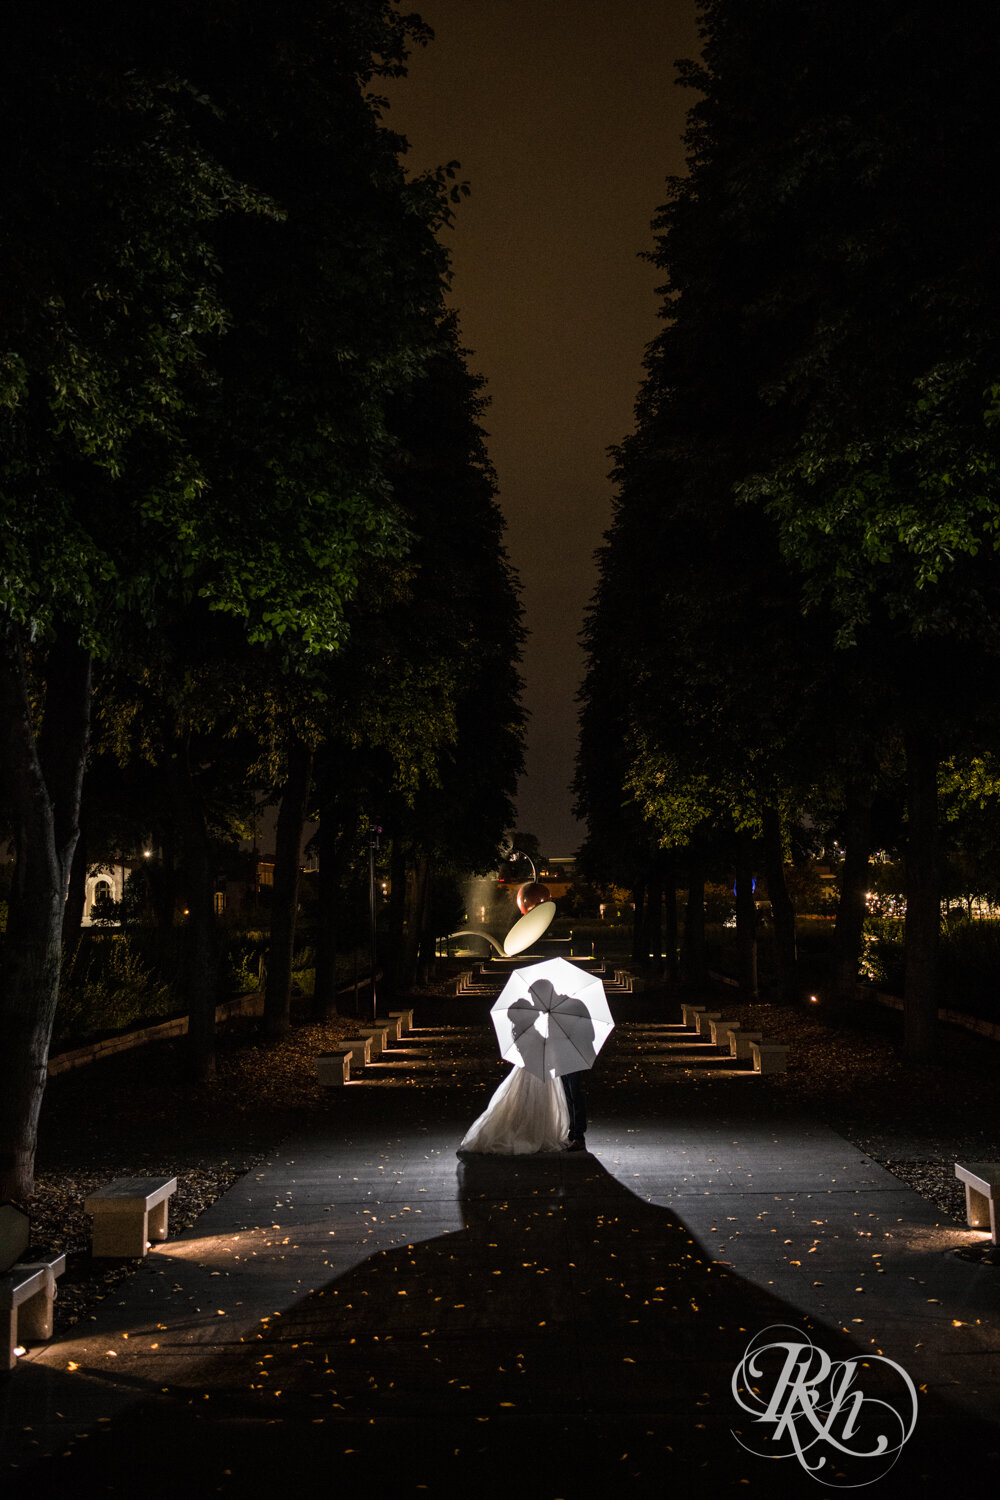 Asian bride and groom kiss in front Spoonbridge and Cherry in Sculpture Garden in Minneapolis, Minnesota at night.